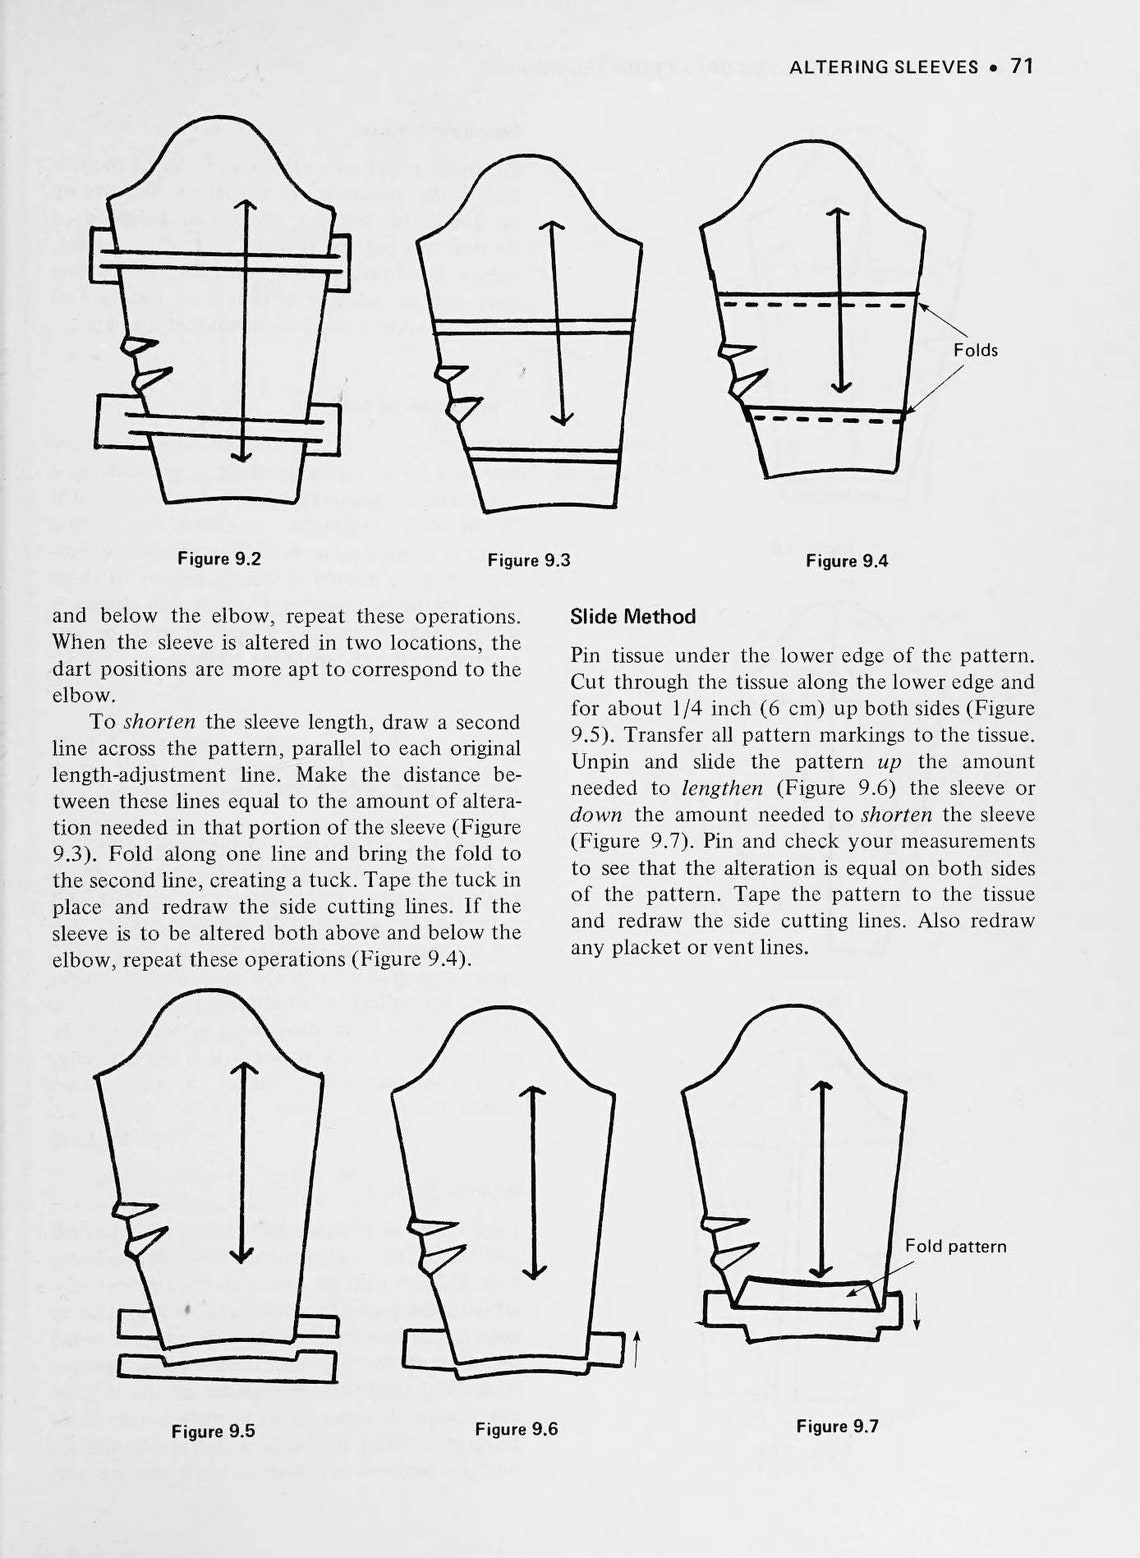 Dressmaking Pattern making Concepts of fit: An | Etsy